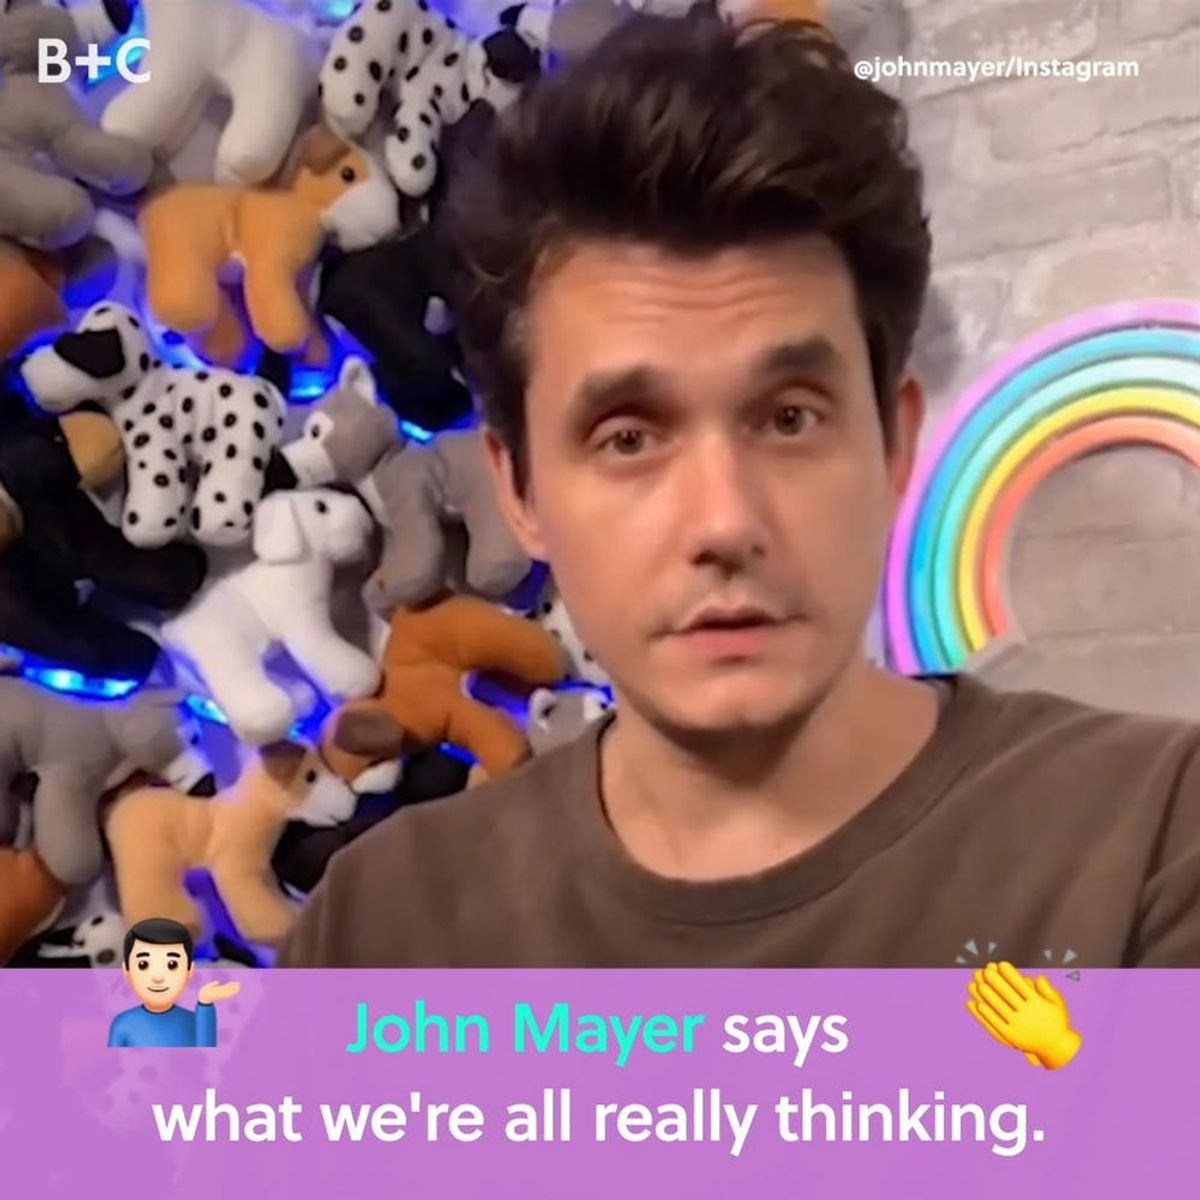 John Mayer Says What We’re All Really Thinking